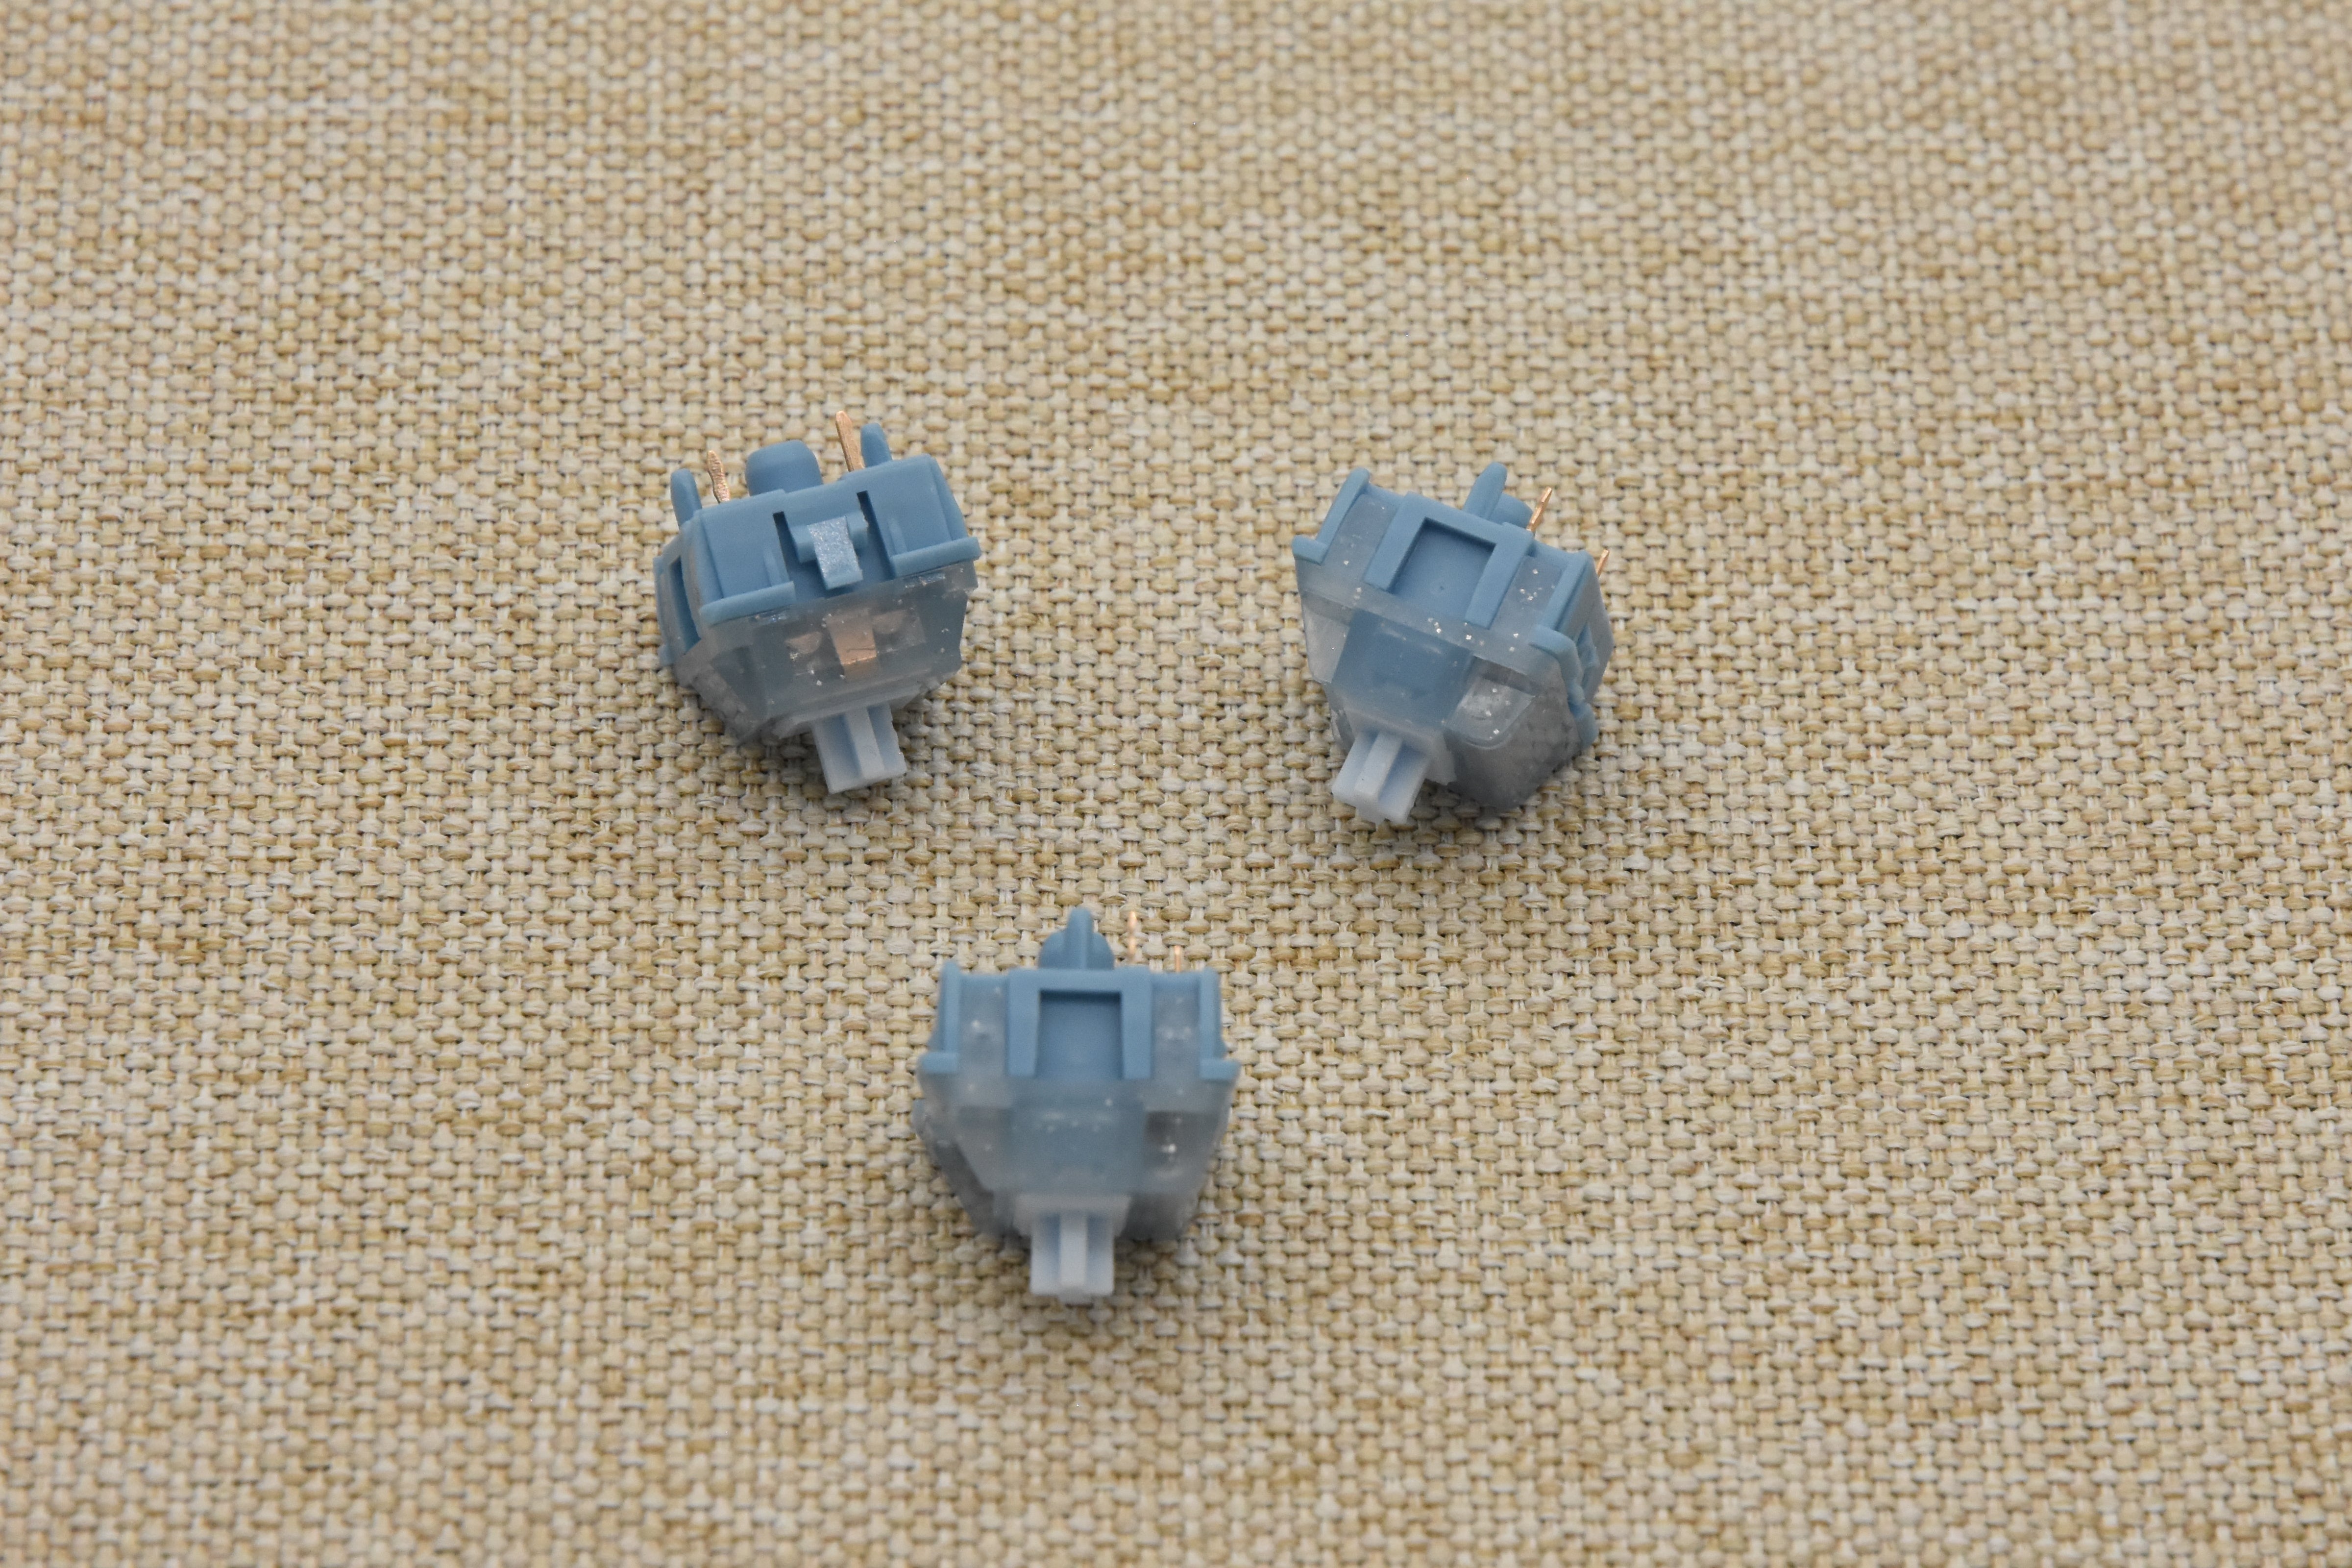 HMX BLUE TOPAZ LINEAR SWITCH FACTORY LUBED EDITION (10PCS)